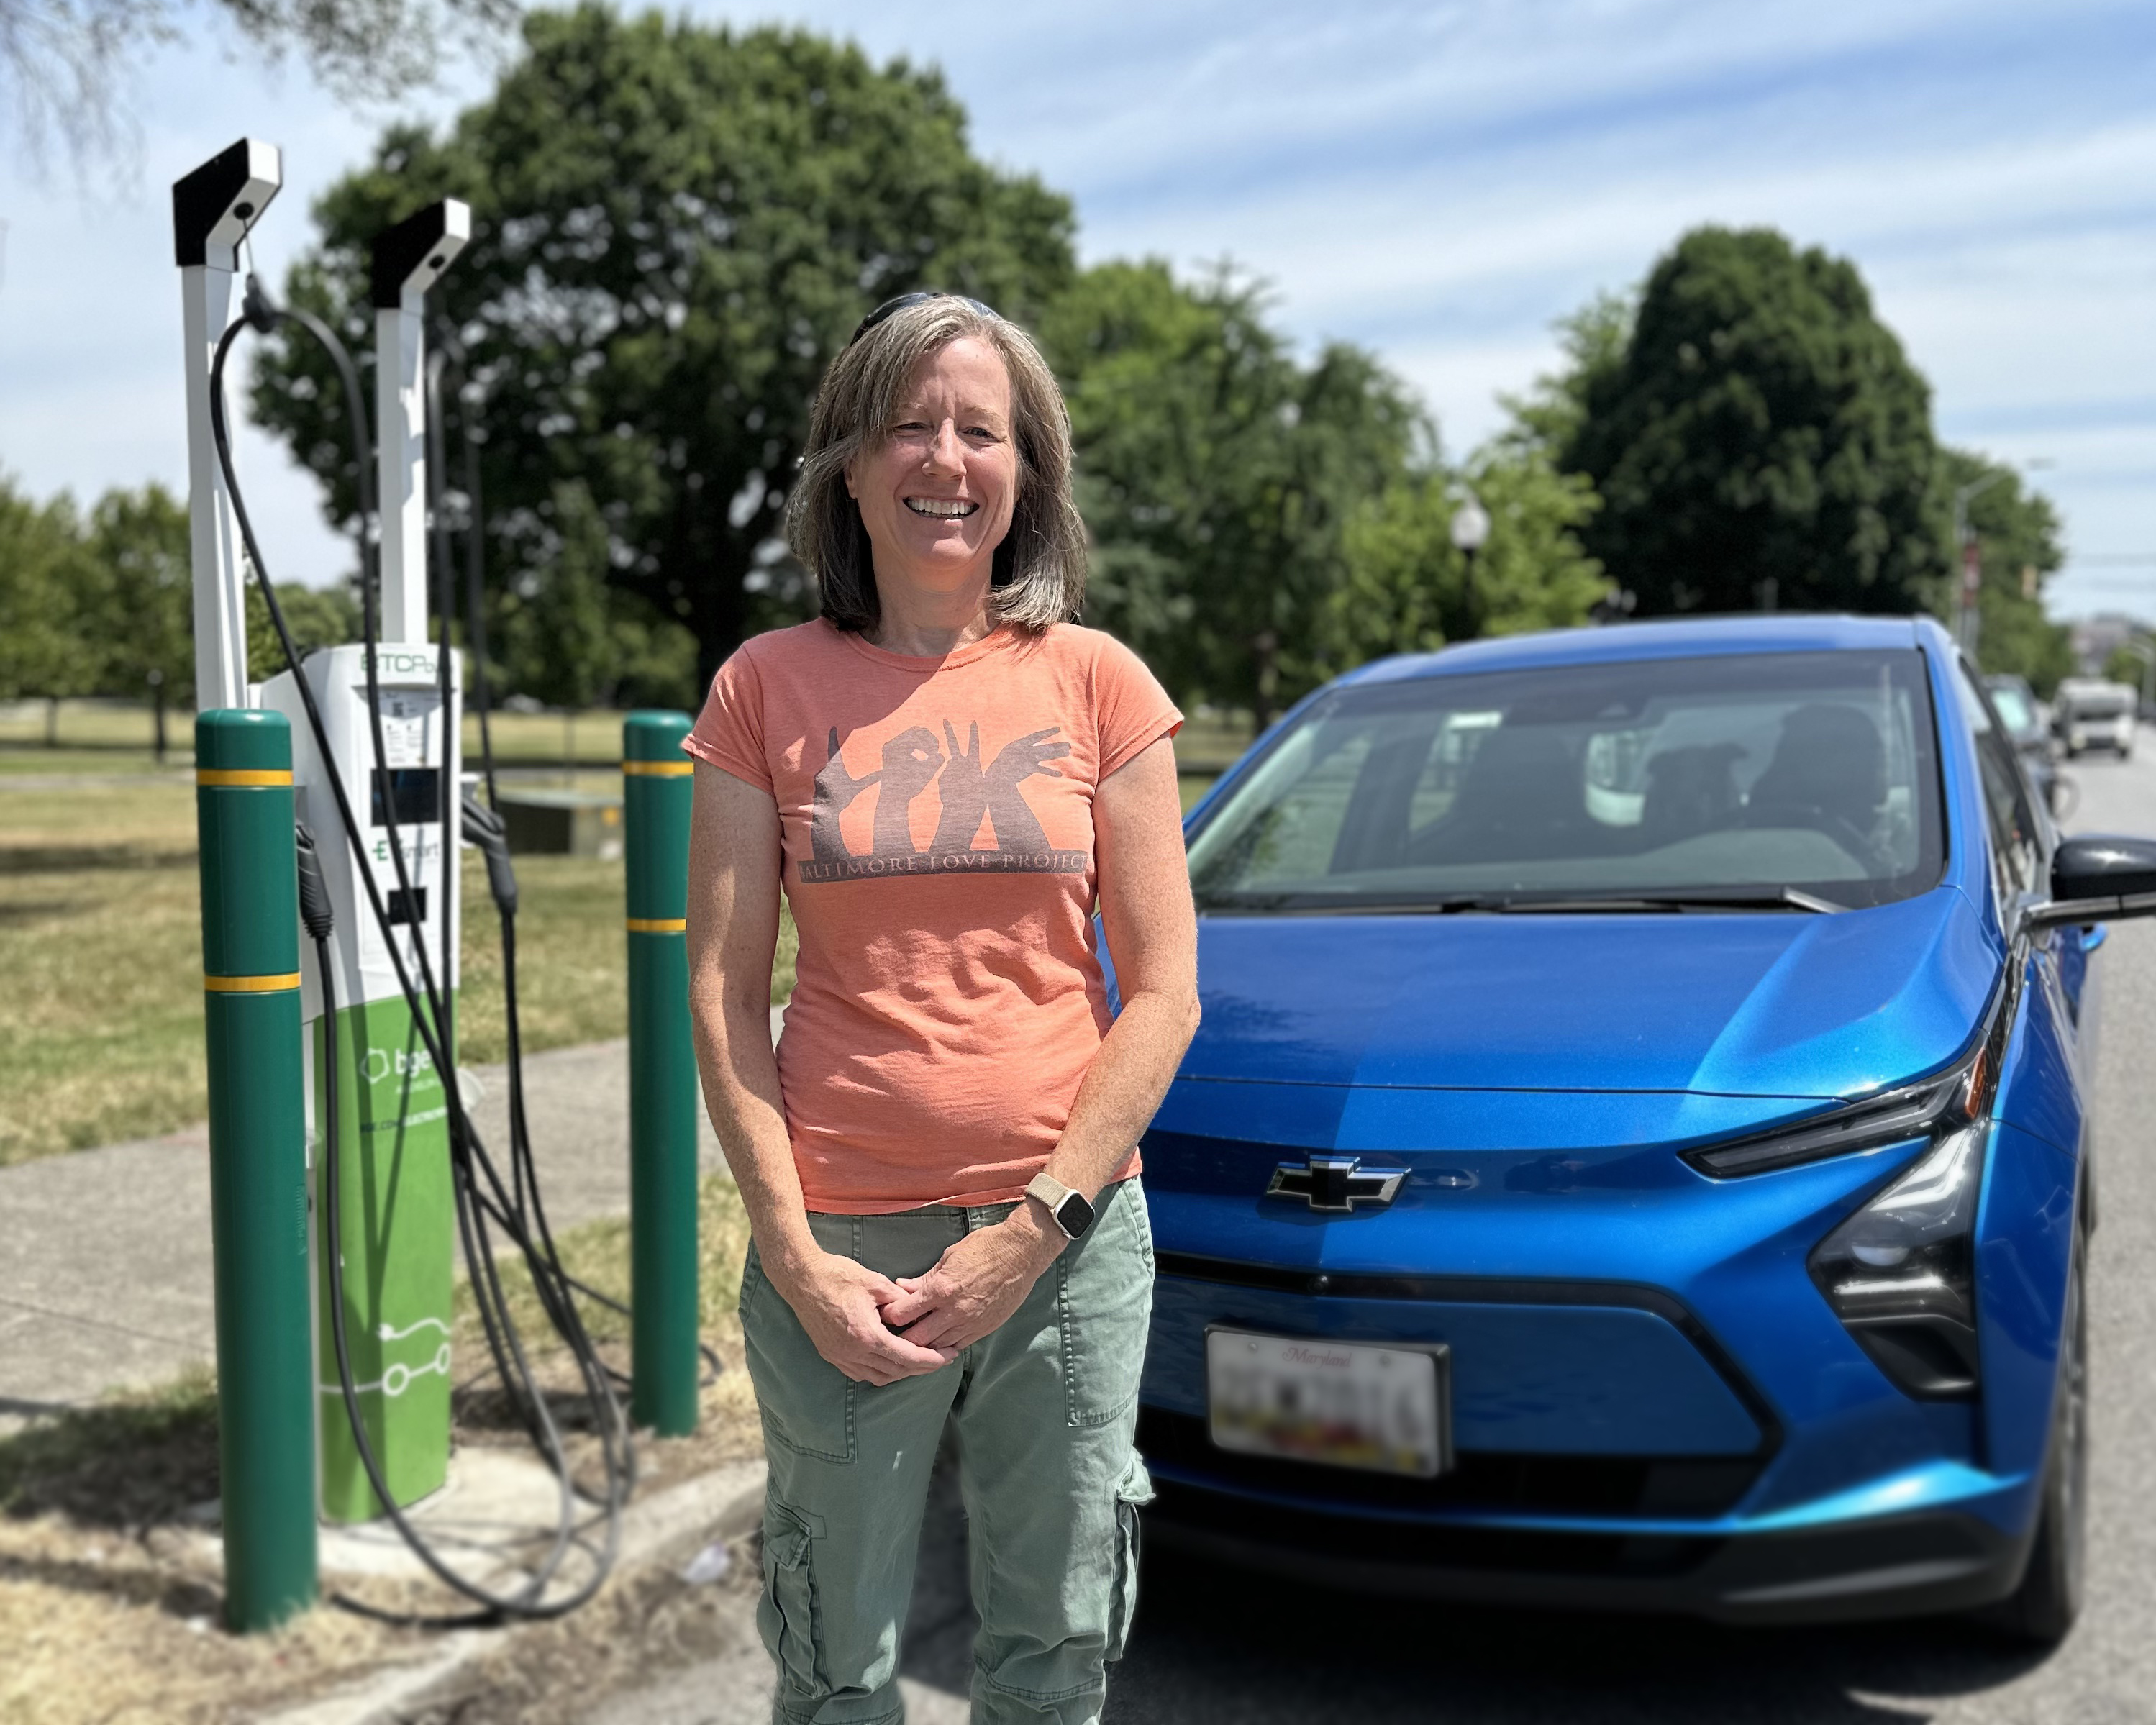 Woman standing next to electric vehicle charging station and vehicle